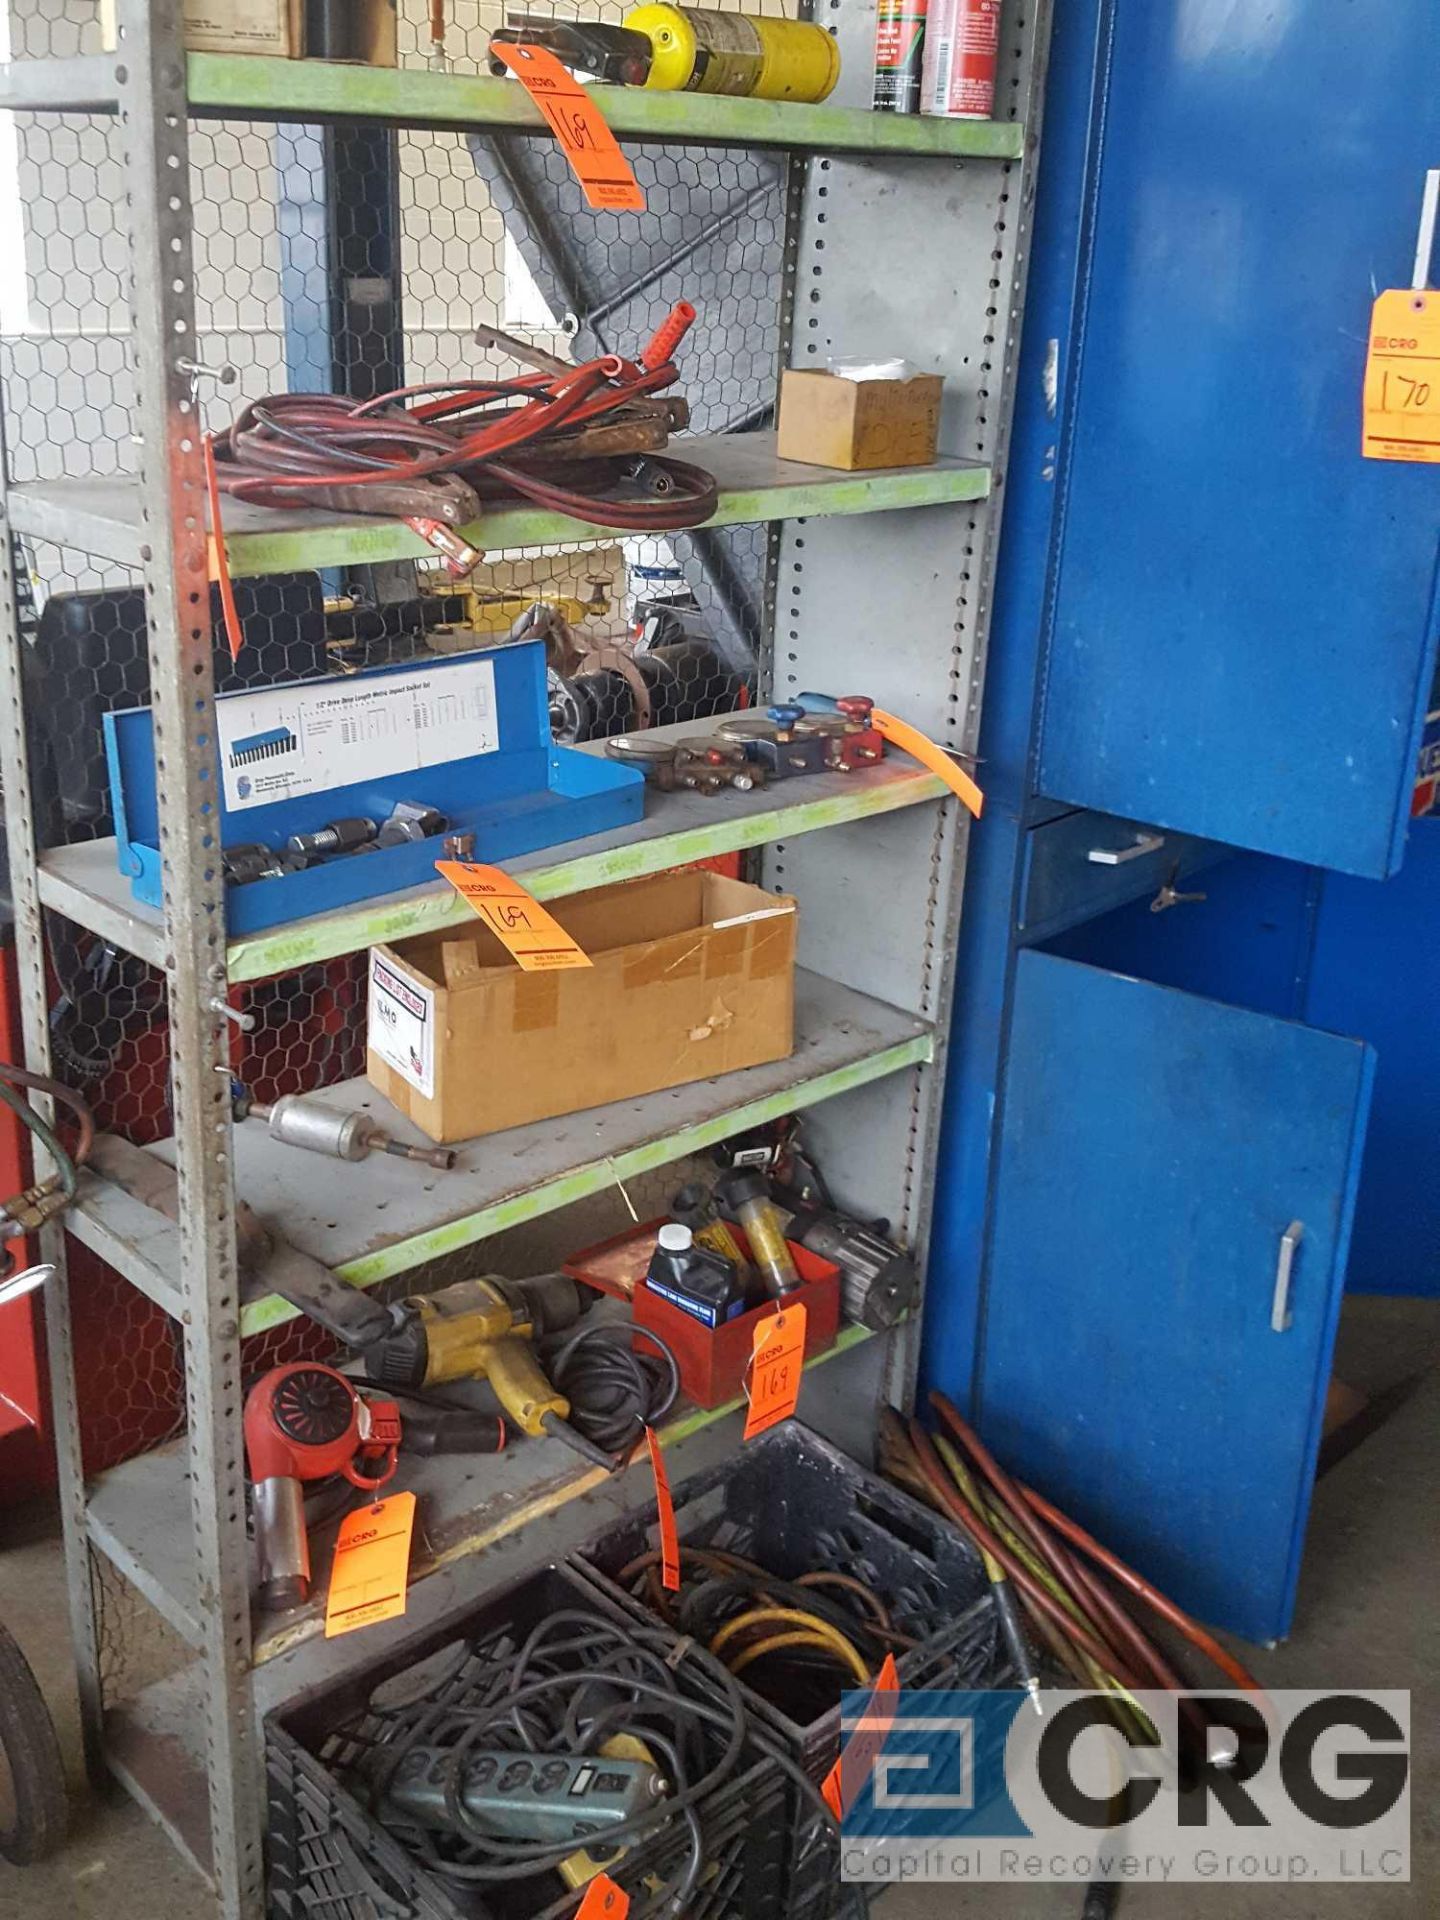 Lot of assorted automotive repair tools and accessories etc. ; including 2 sets of jumper cables,